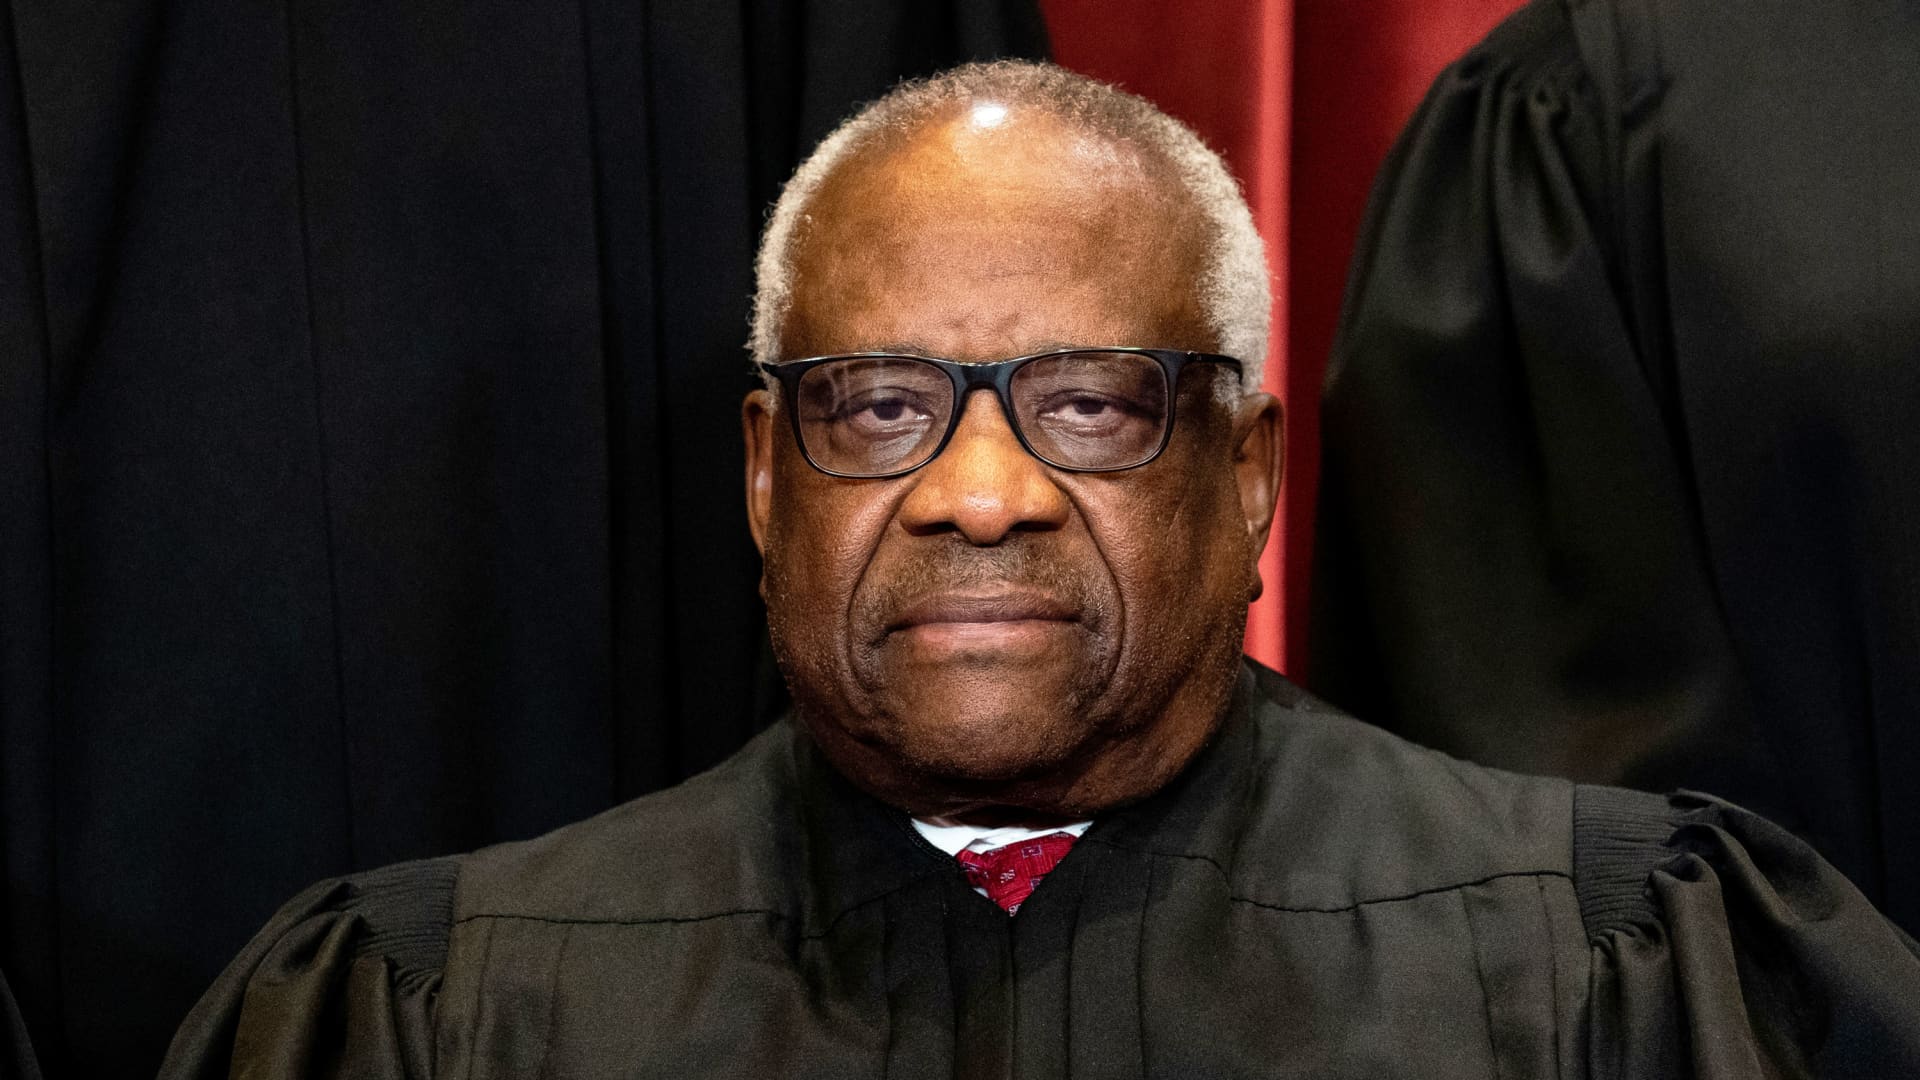 Supreme Court Justice Clarence Thomas says gay rights, contraception rulings should be reconsidered after Roe is overturned